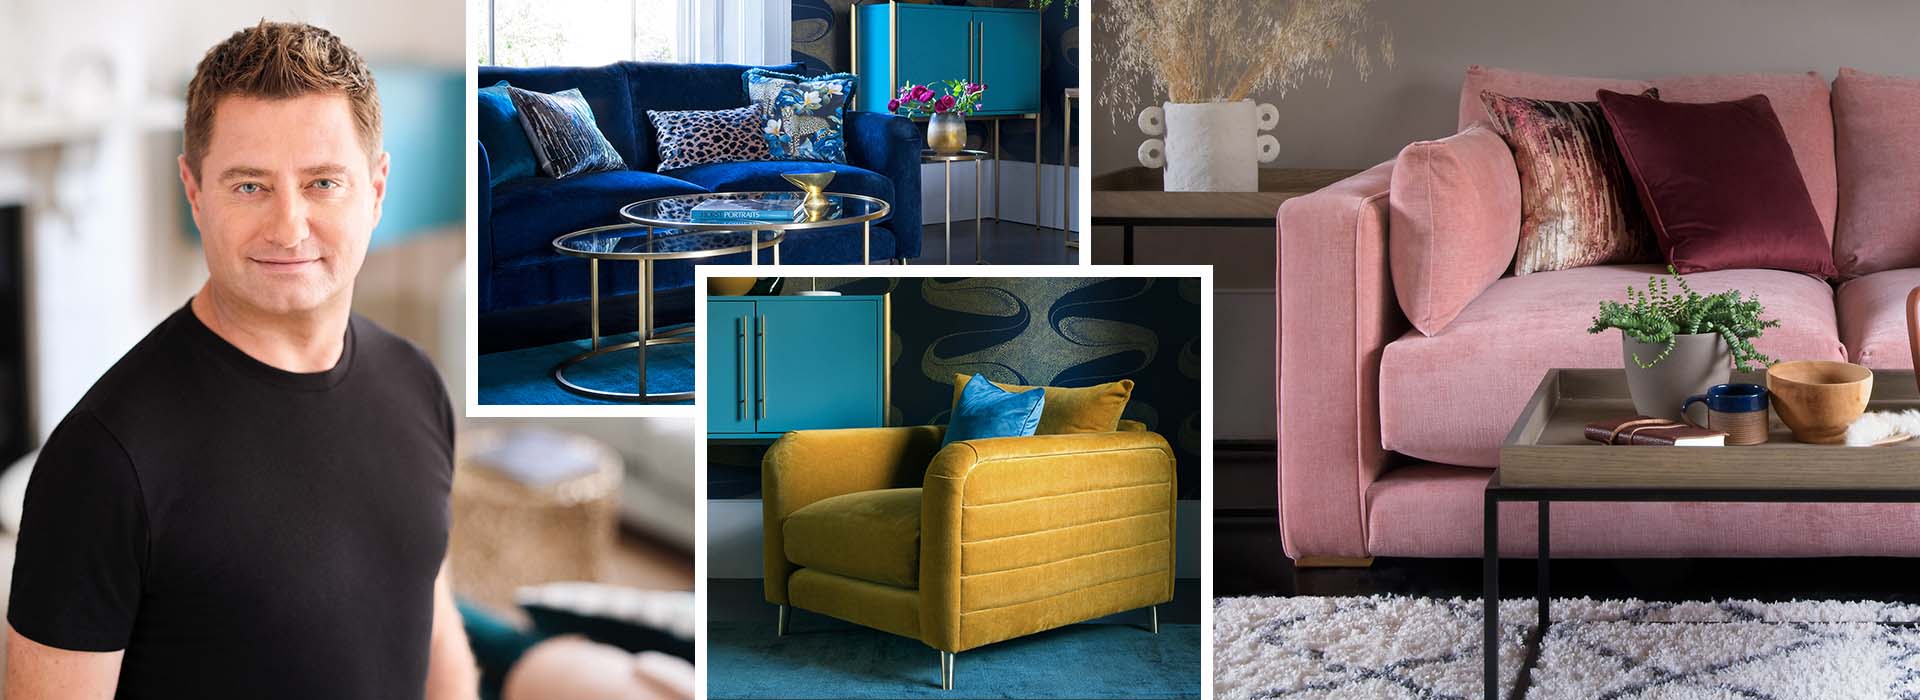 How we styled it – Our collaboration with Ideal Home and George Clarke